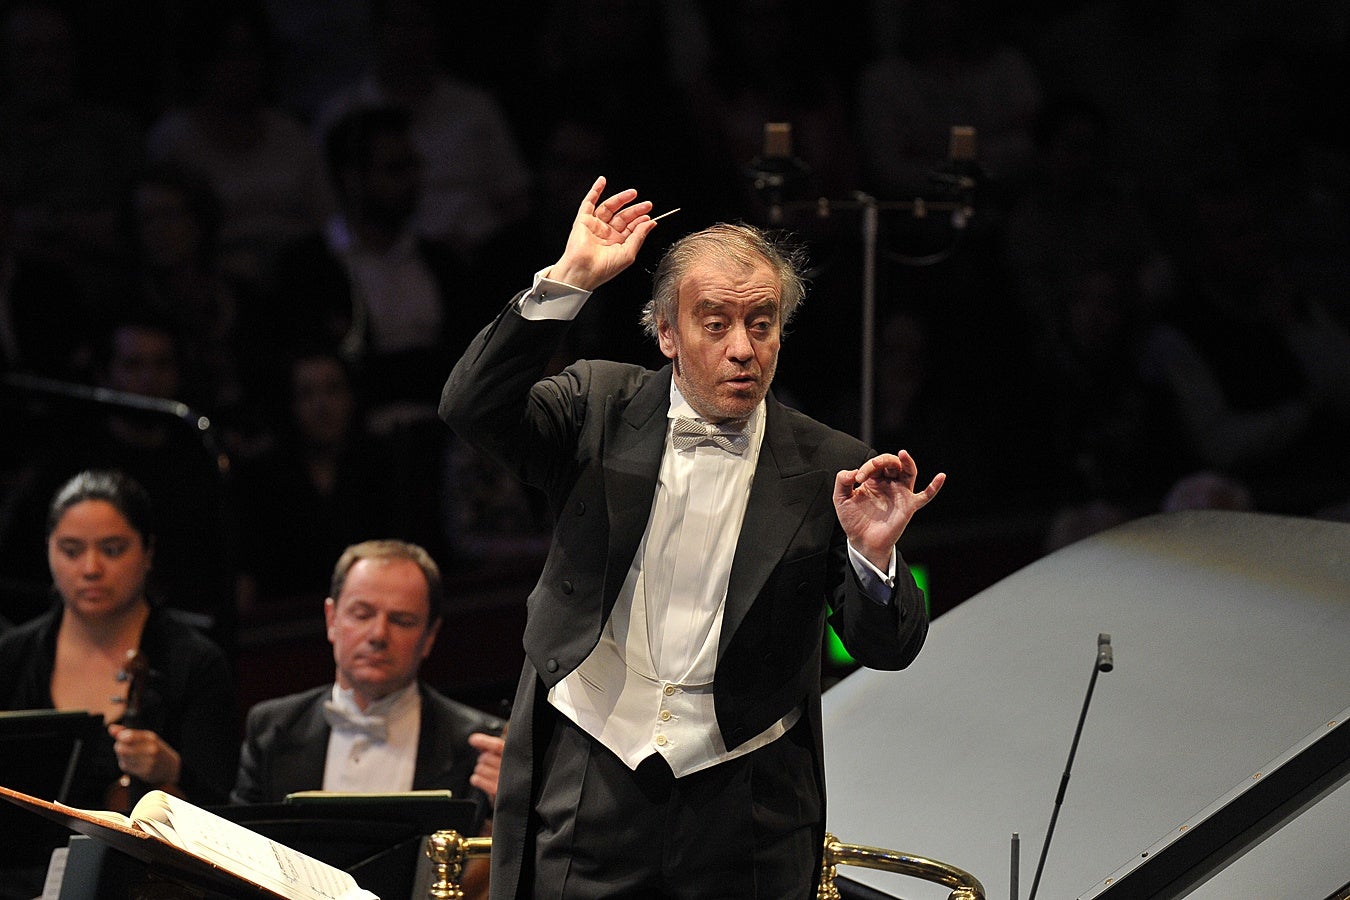 Valery Gergiev conducts the London Symphony Orchestra in a BBC Proms concert featuring all five of Prokofiev's piano concertos performed by three pianists - Daniil Trifonov, Sergei Babayan and Alexei Volodin, at the Royal Albert Hall on Tuesday 28 July